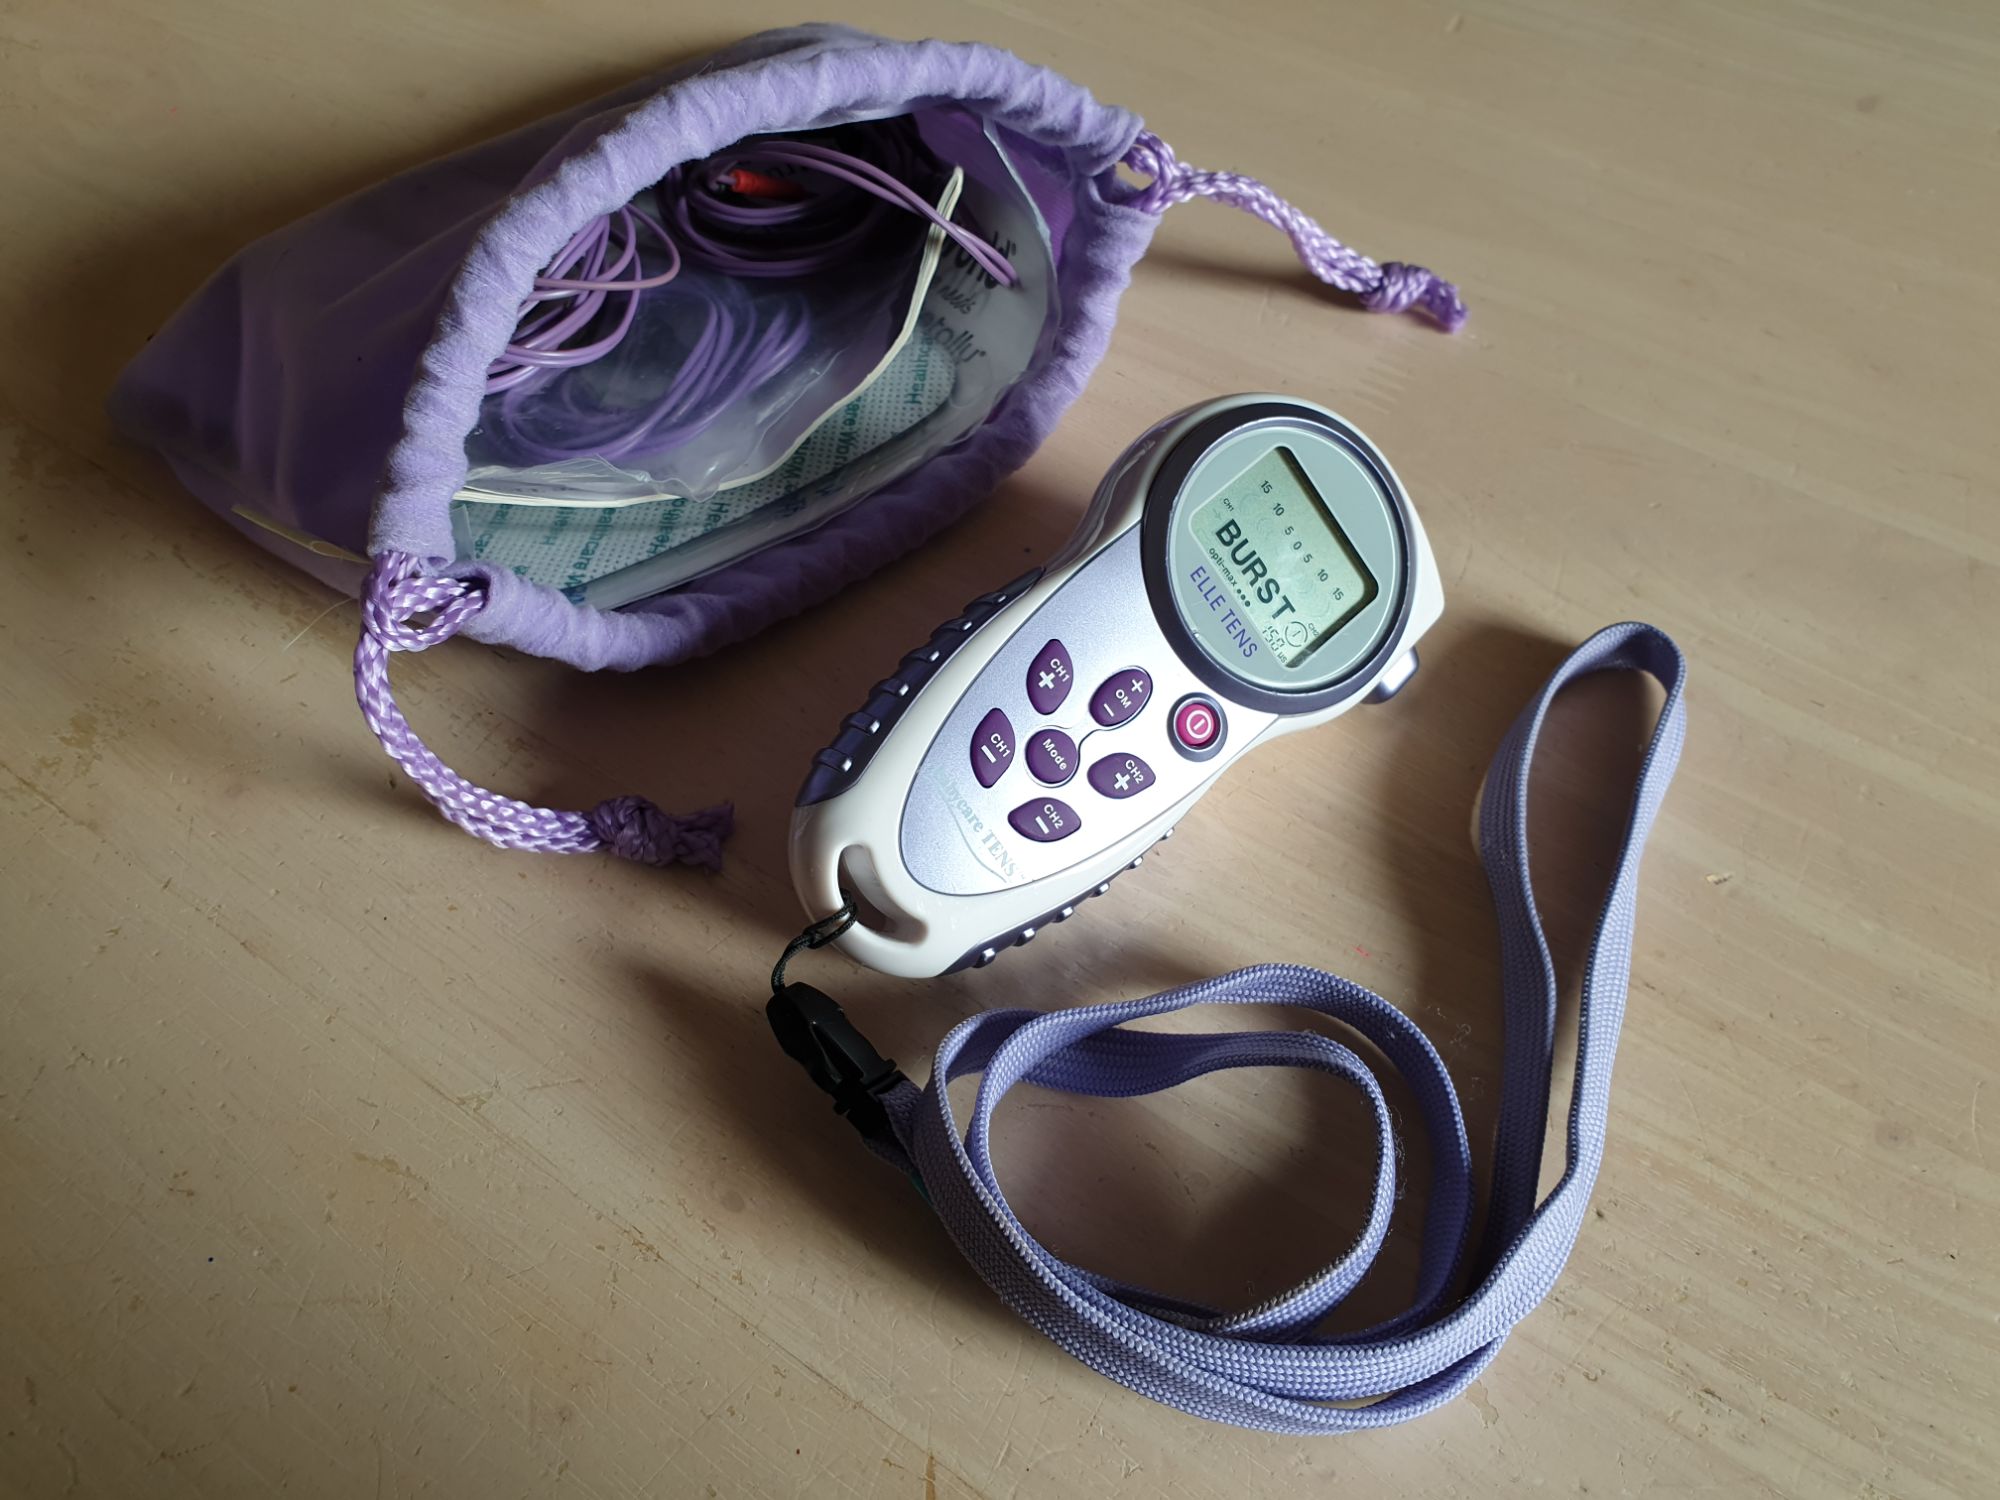 A TENS machine and cloth bag on a table.